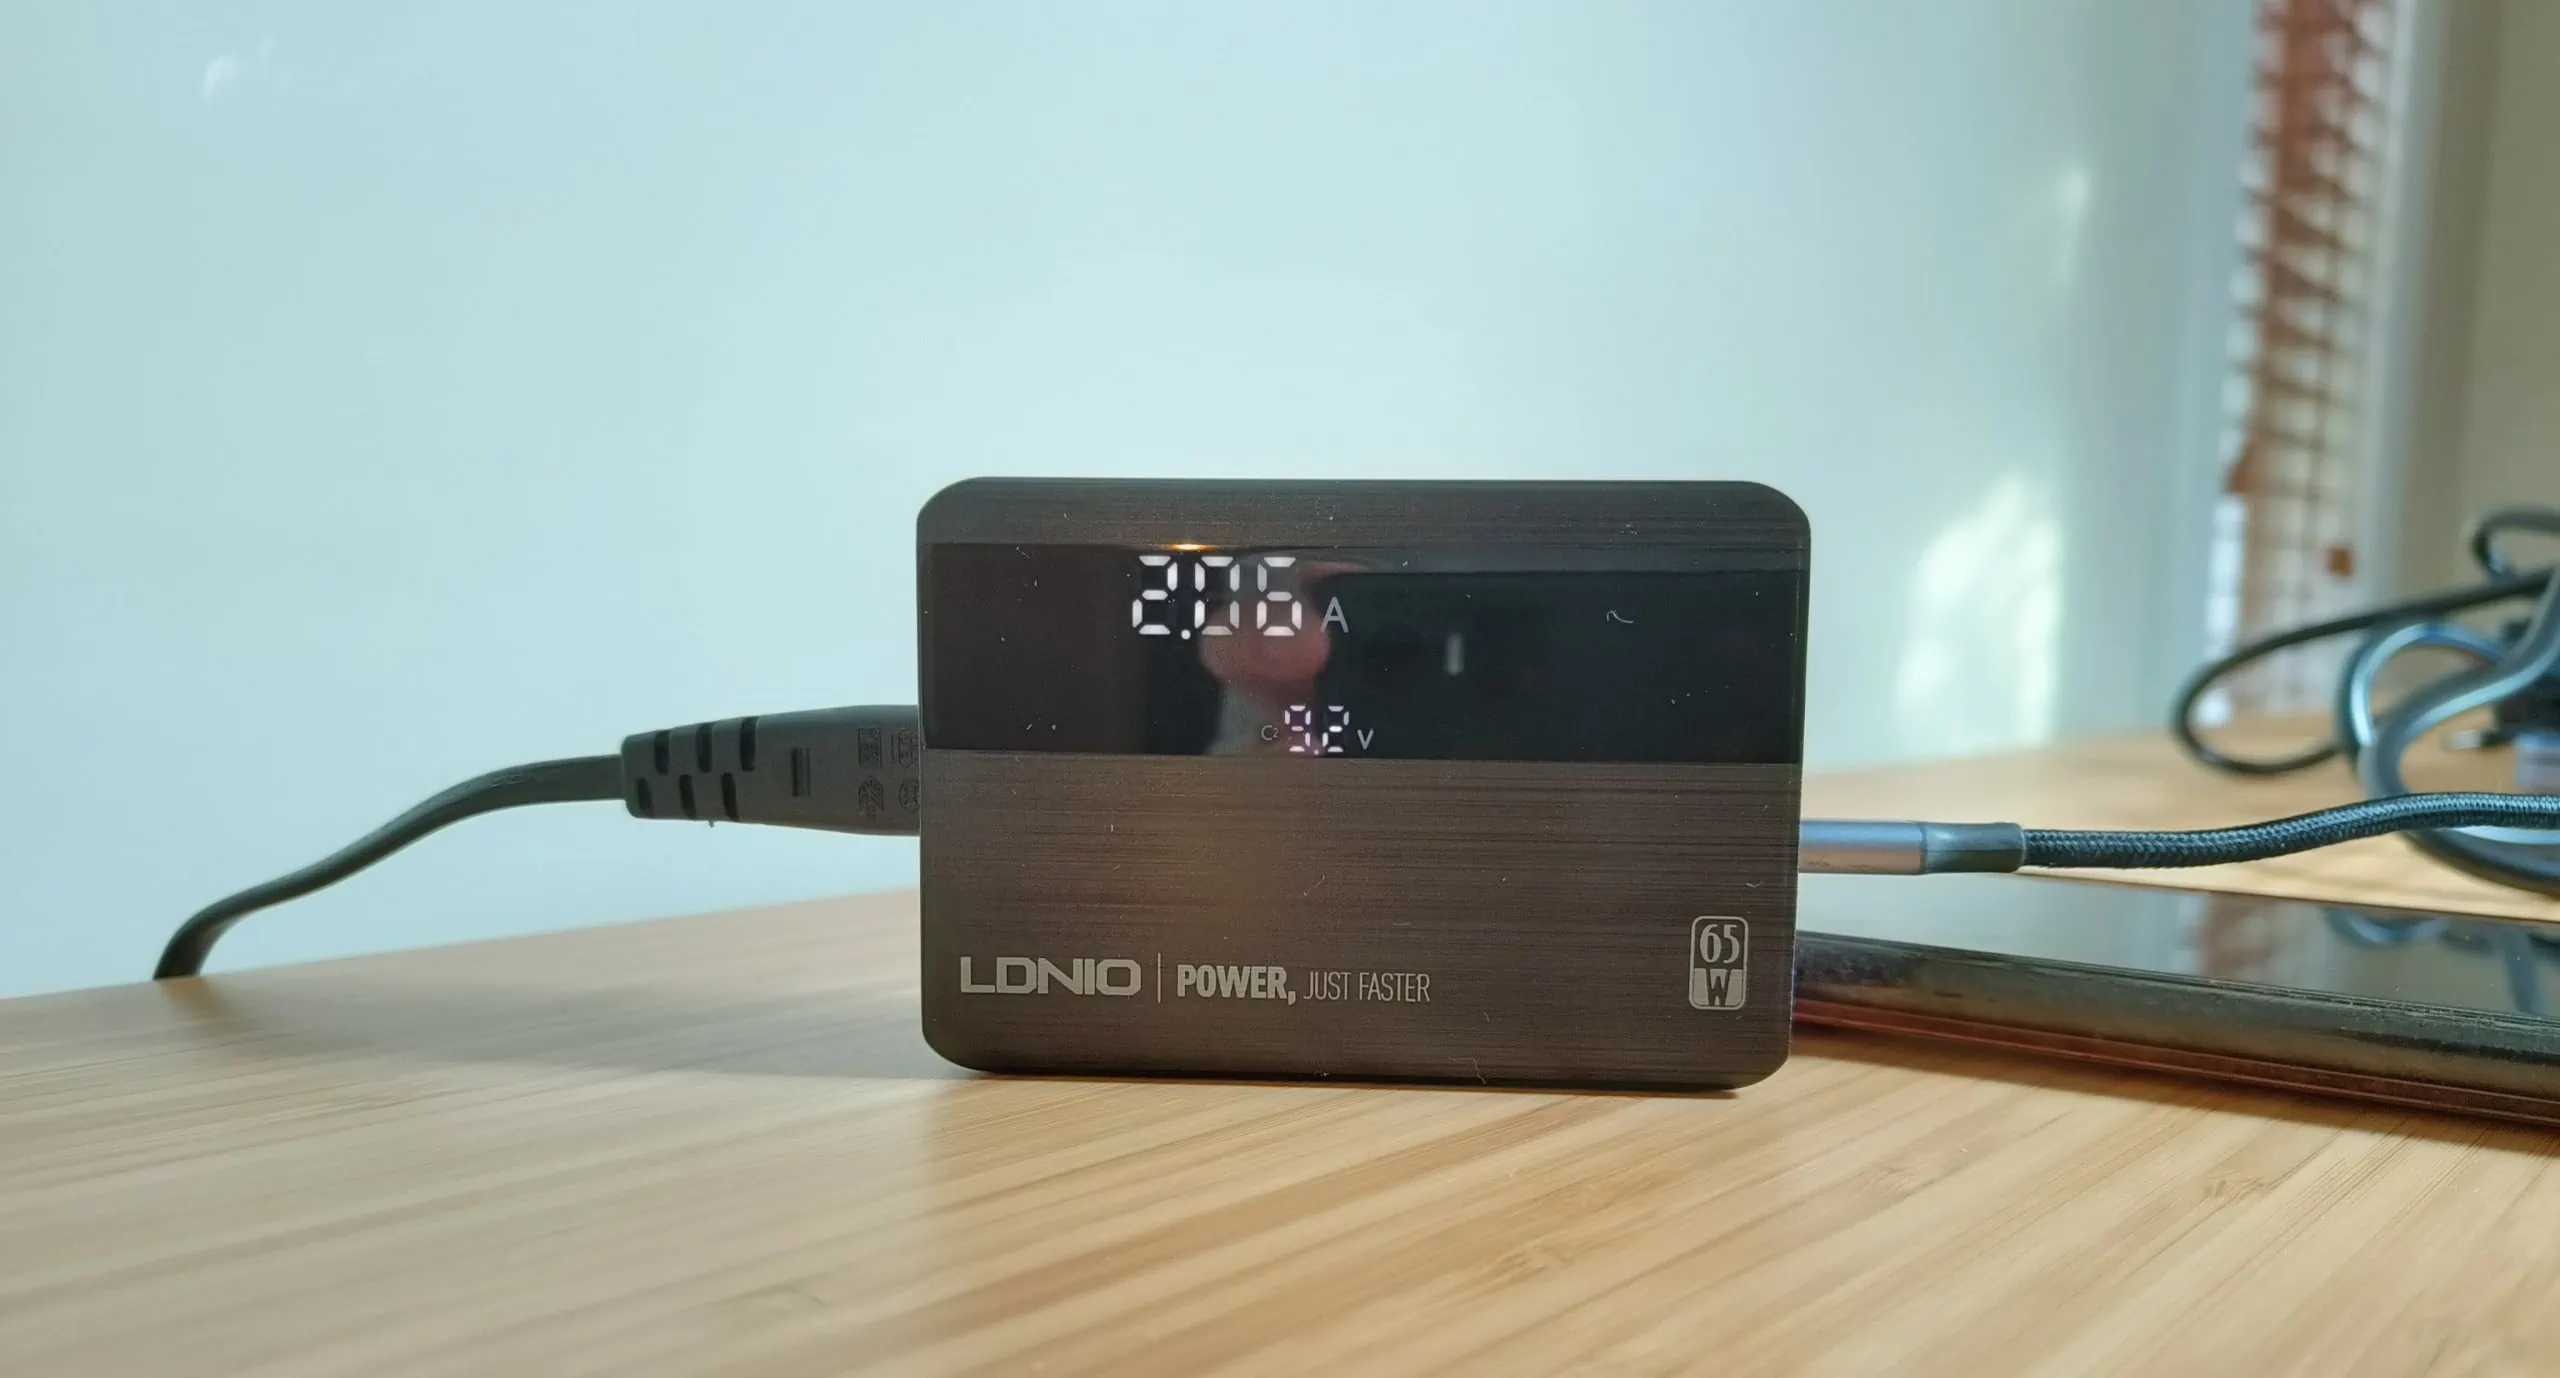 LDNIO 65W USB Power Delivery Charging Station with LCD Review – USB power meter built-in